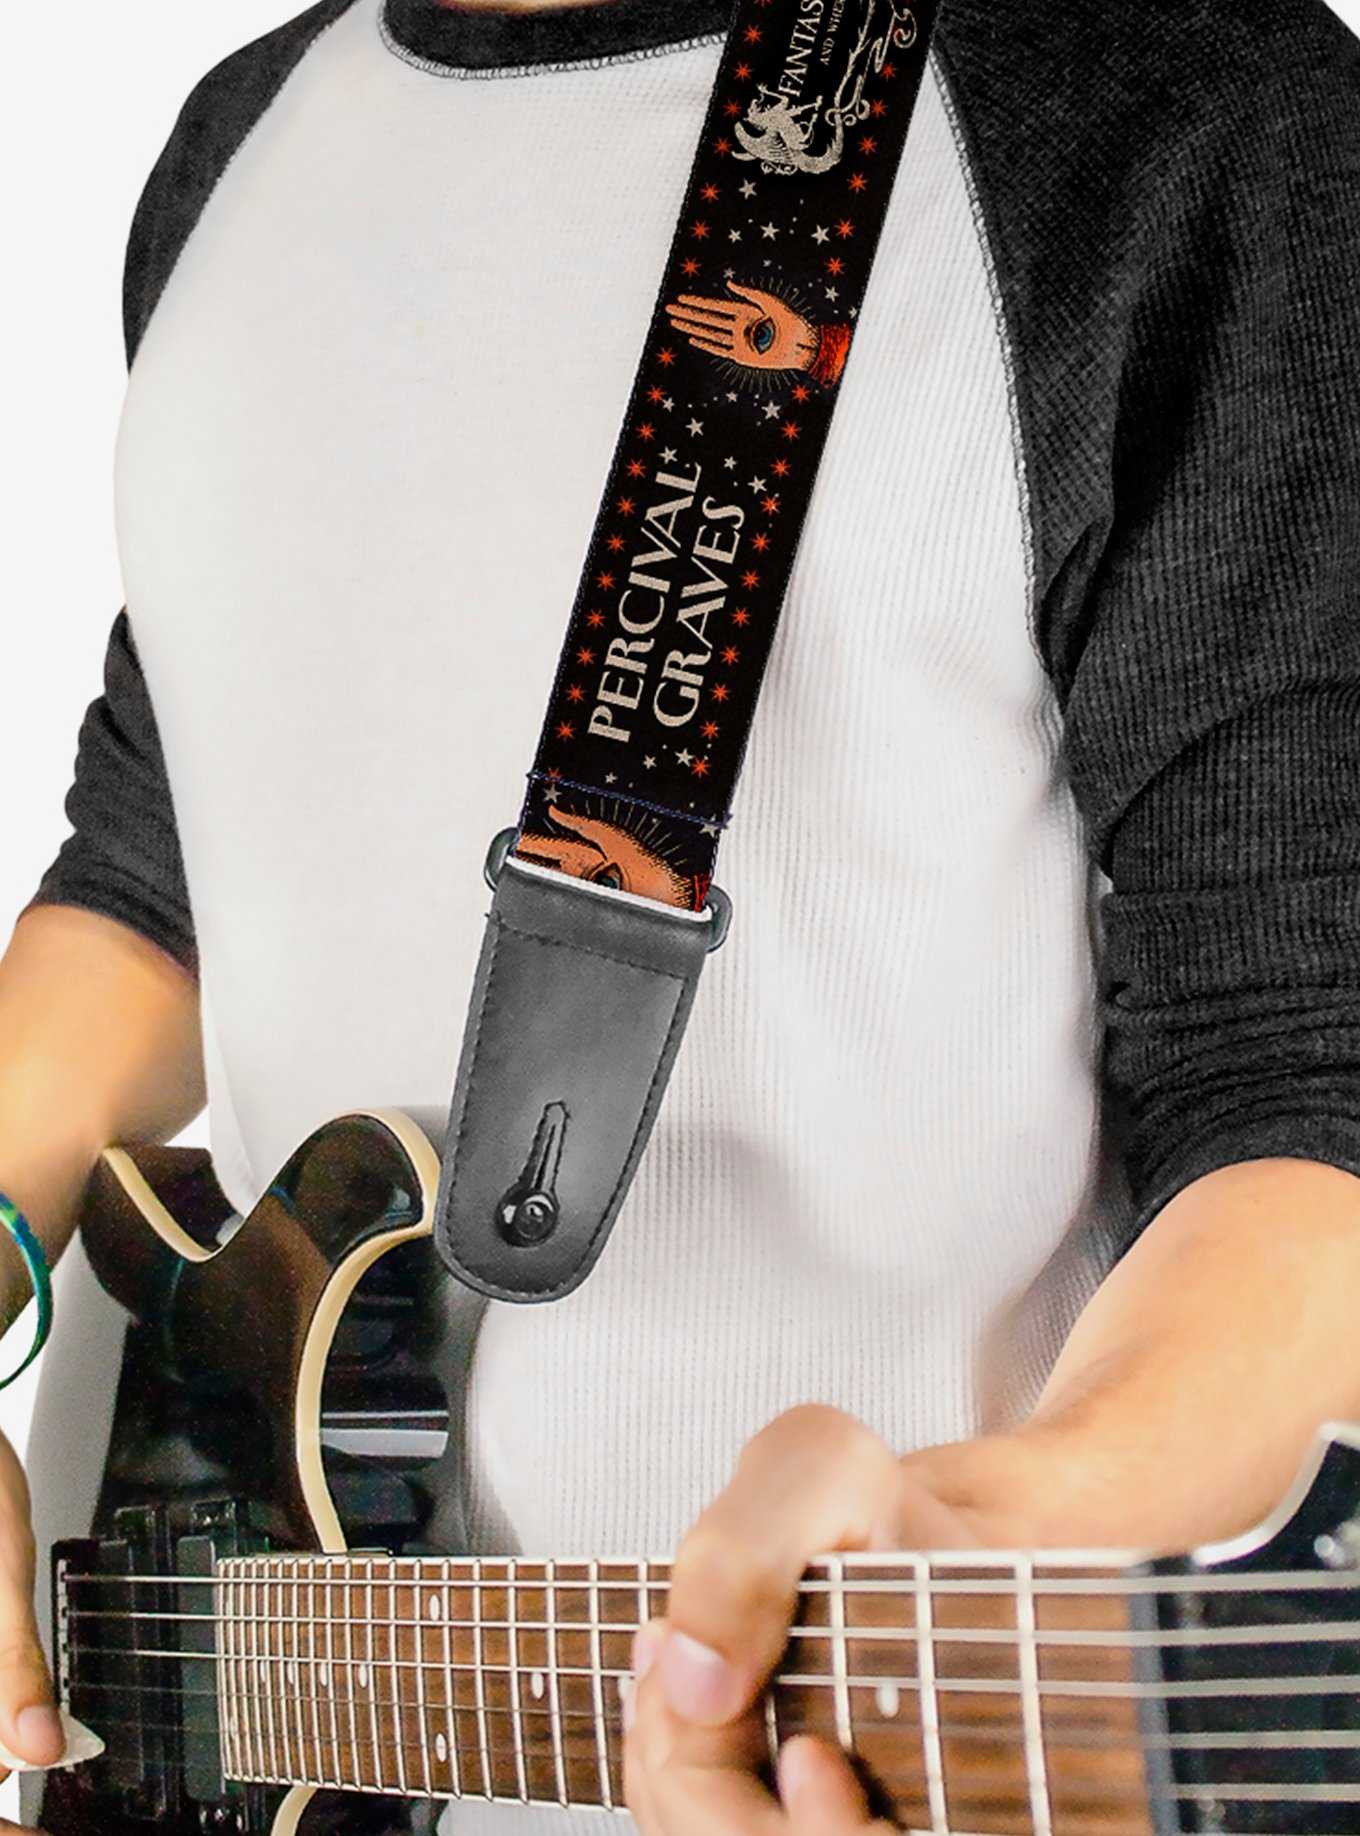 Fantastic Beasts Percival Graves Eye in Hand Icon Guitar Strap, , hi-res